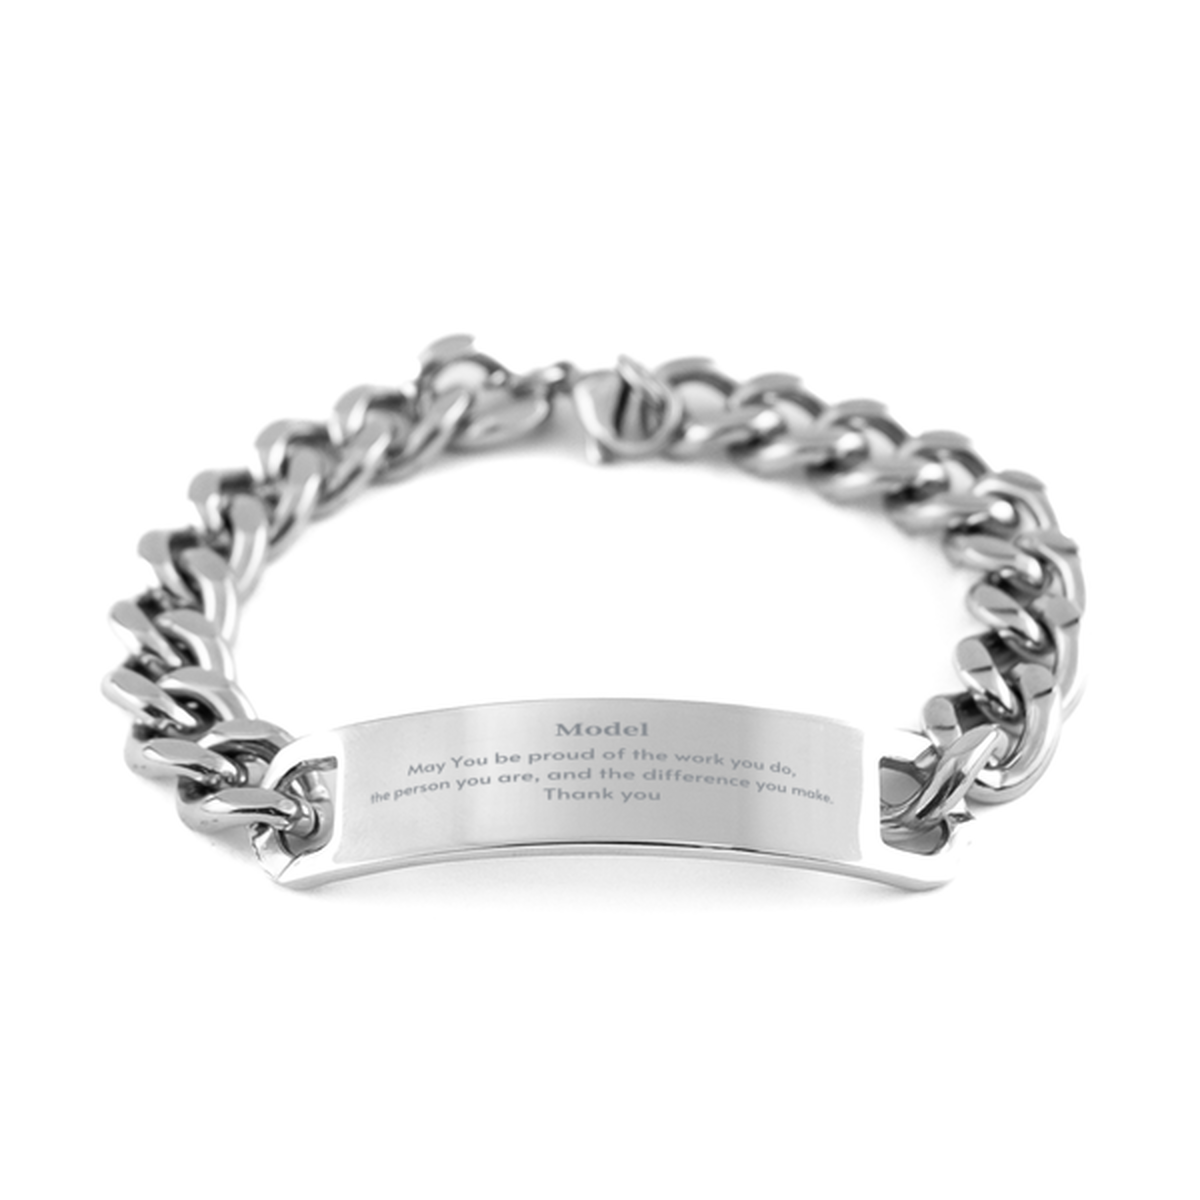 Heartwarming Cuban Chain Stainless Steel Bracelet Retirement Coworkers Gifts for Model, Model May You be proud of the work you do, the person you are Gifts for Boss Men Women Friends